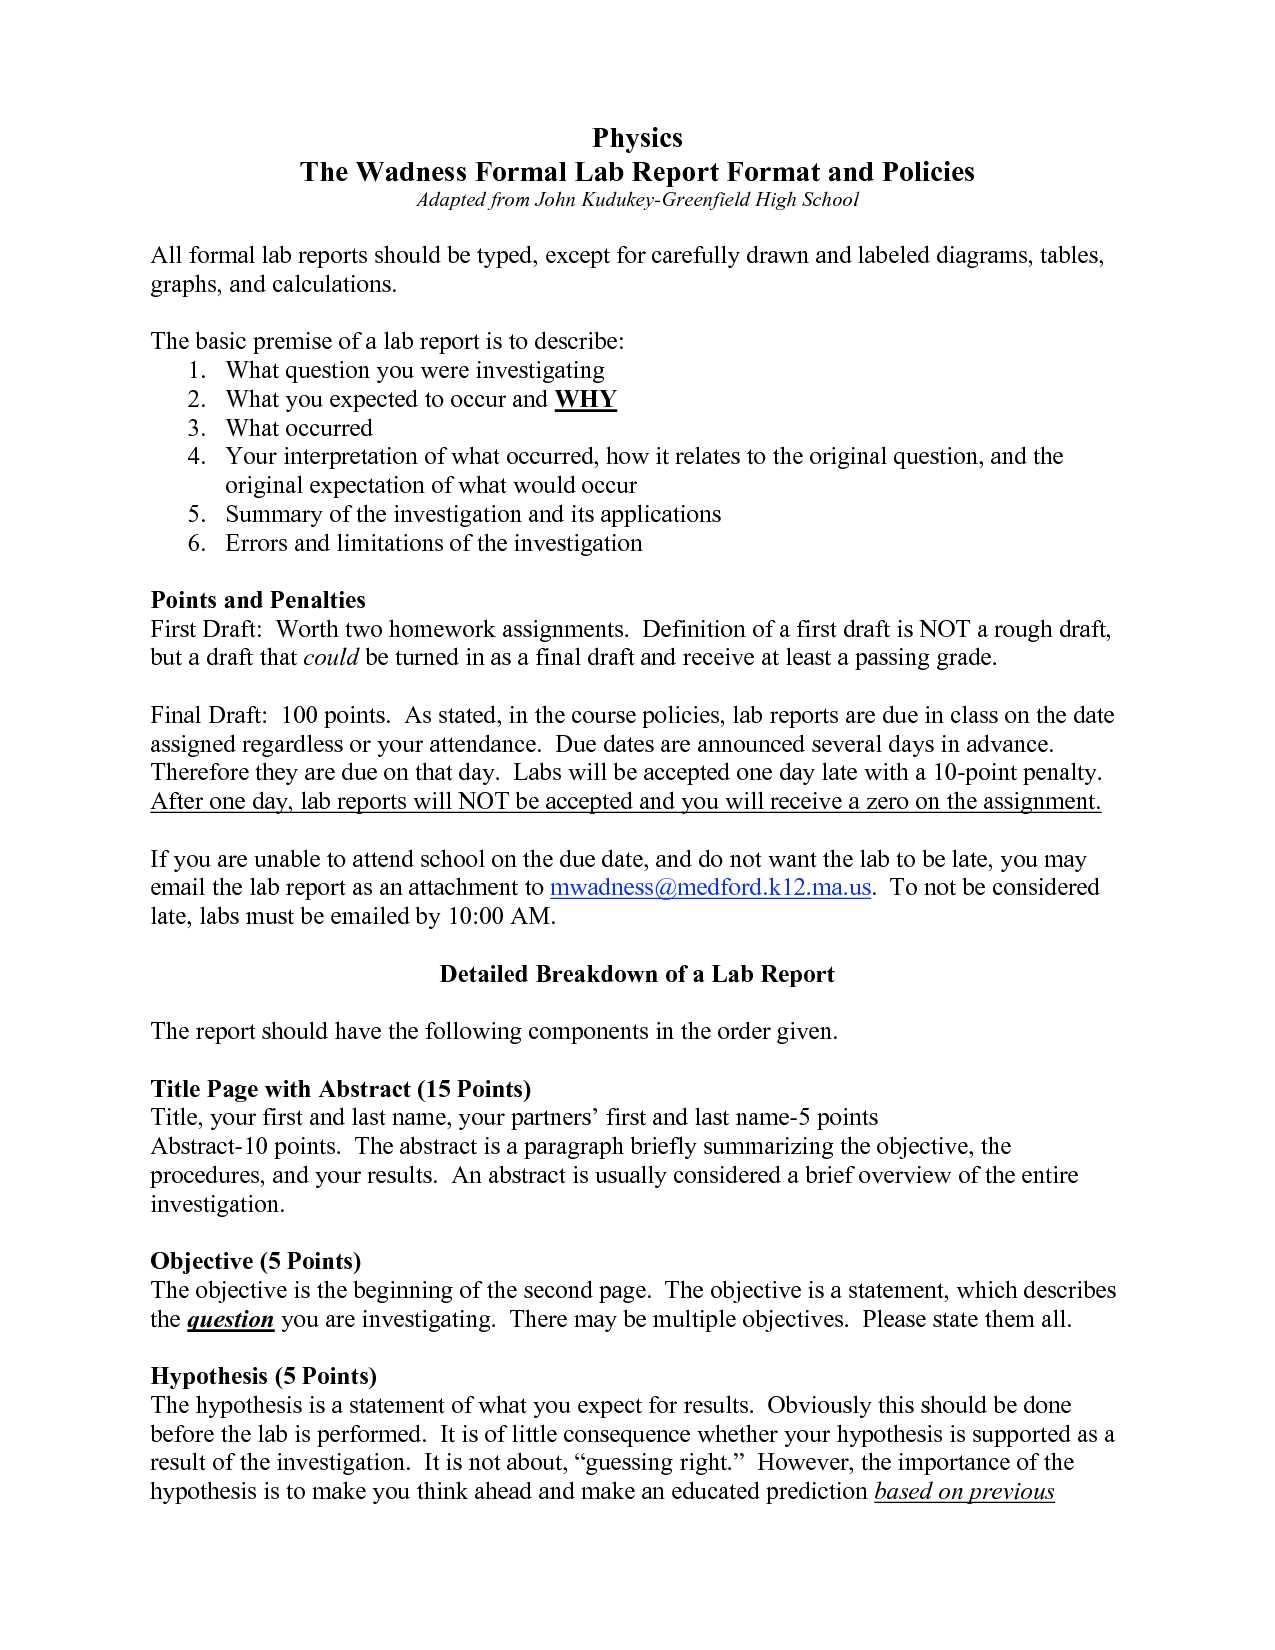 Formal Lab Report Template Physics : Biological Science Throughout Physics Lab Report Template